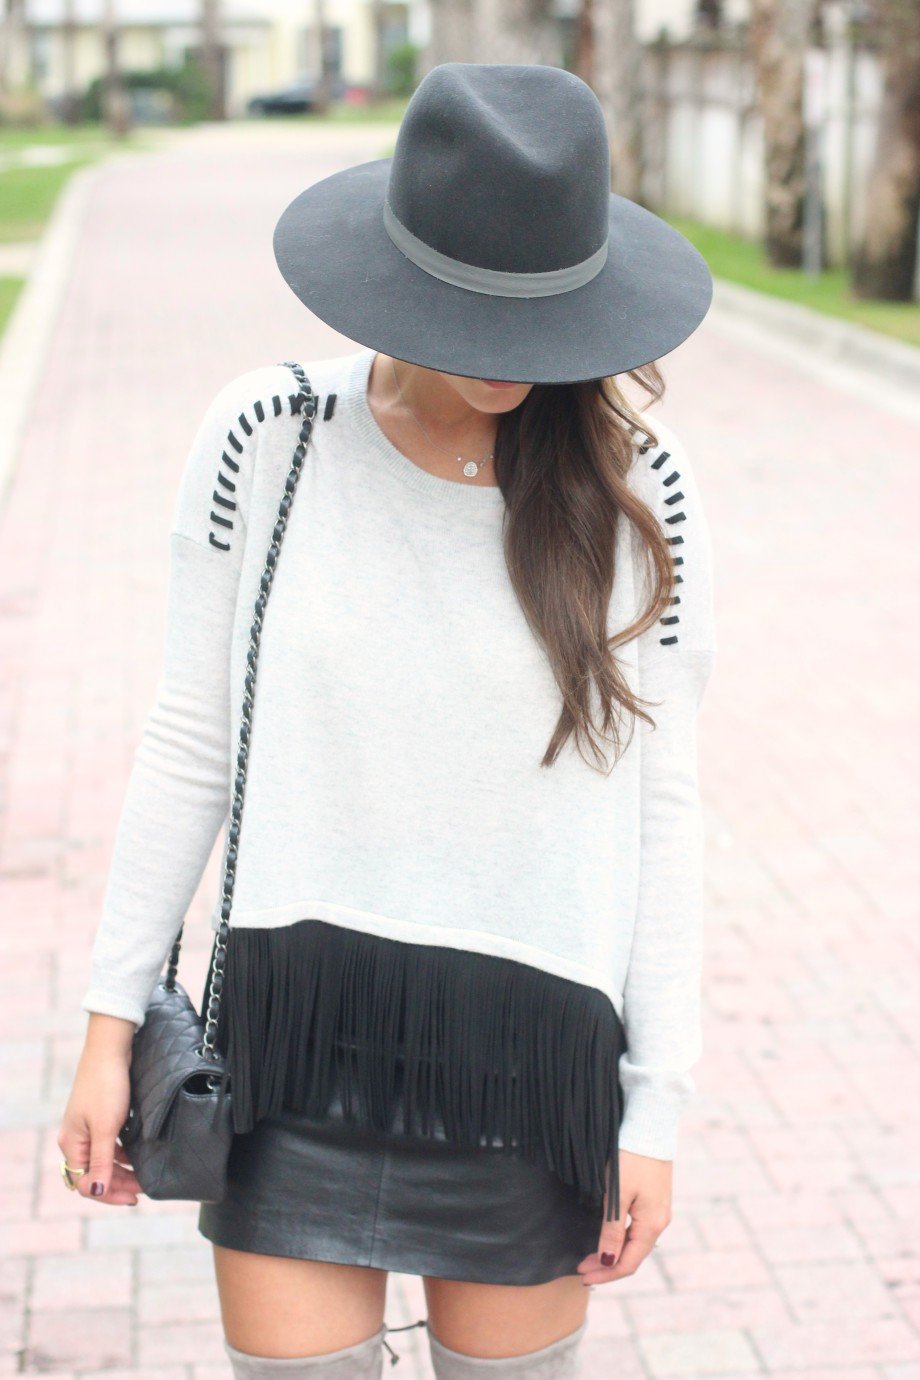 21 Cute Fall Outfit Ideas, super cute outfit inspiration photos for fall!